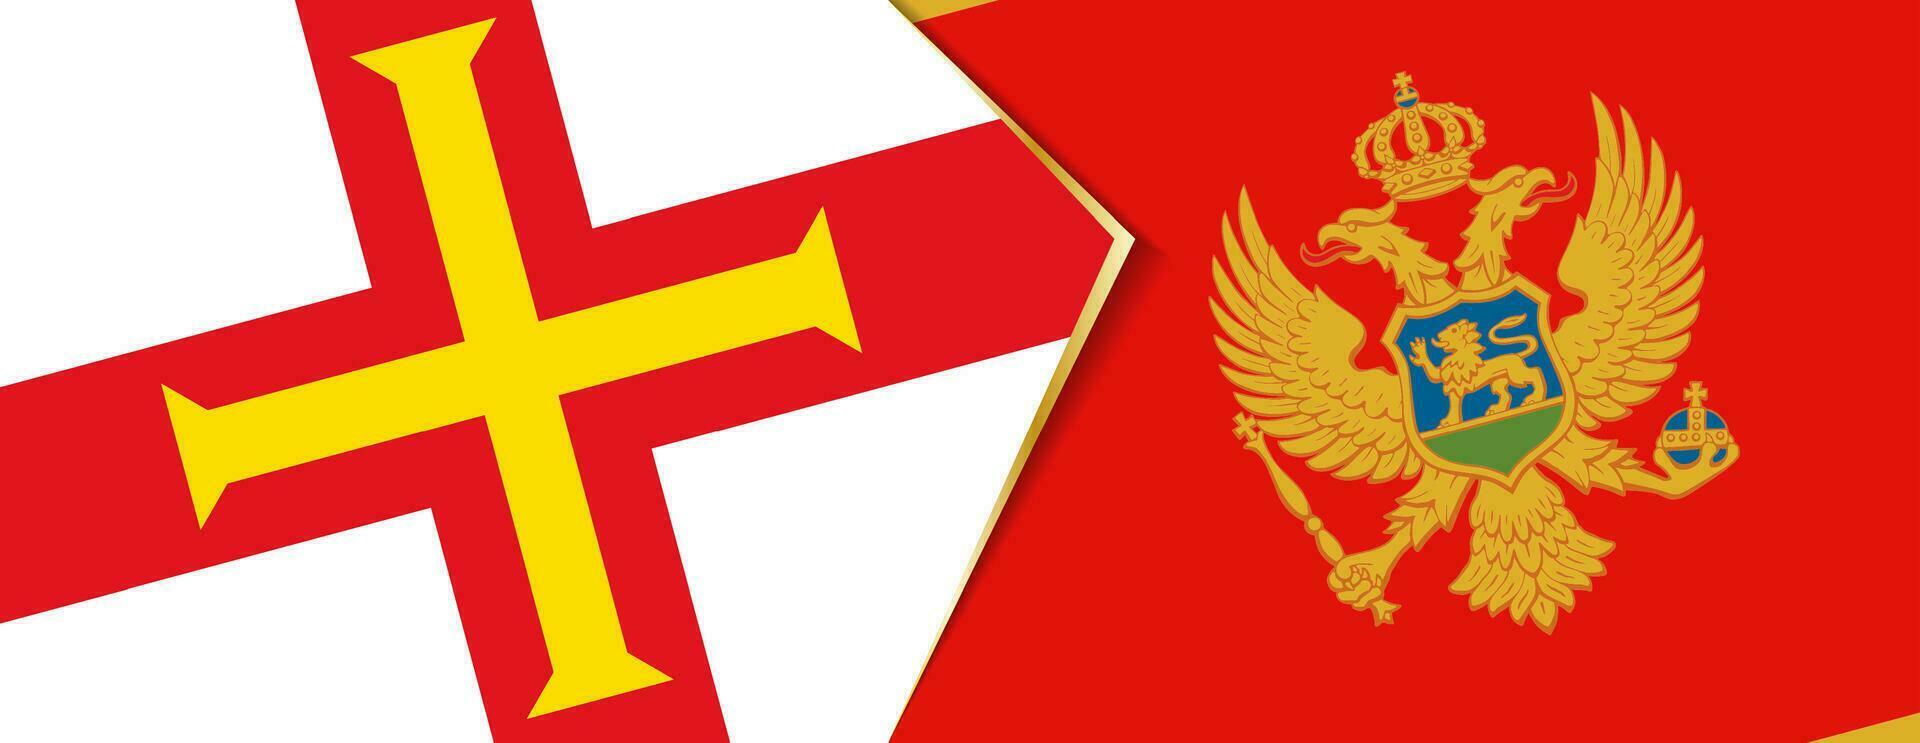 Guernsey and Montenegro flags, two vector flags.